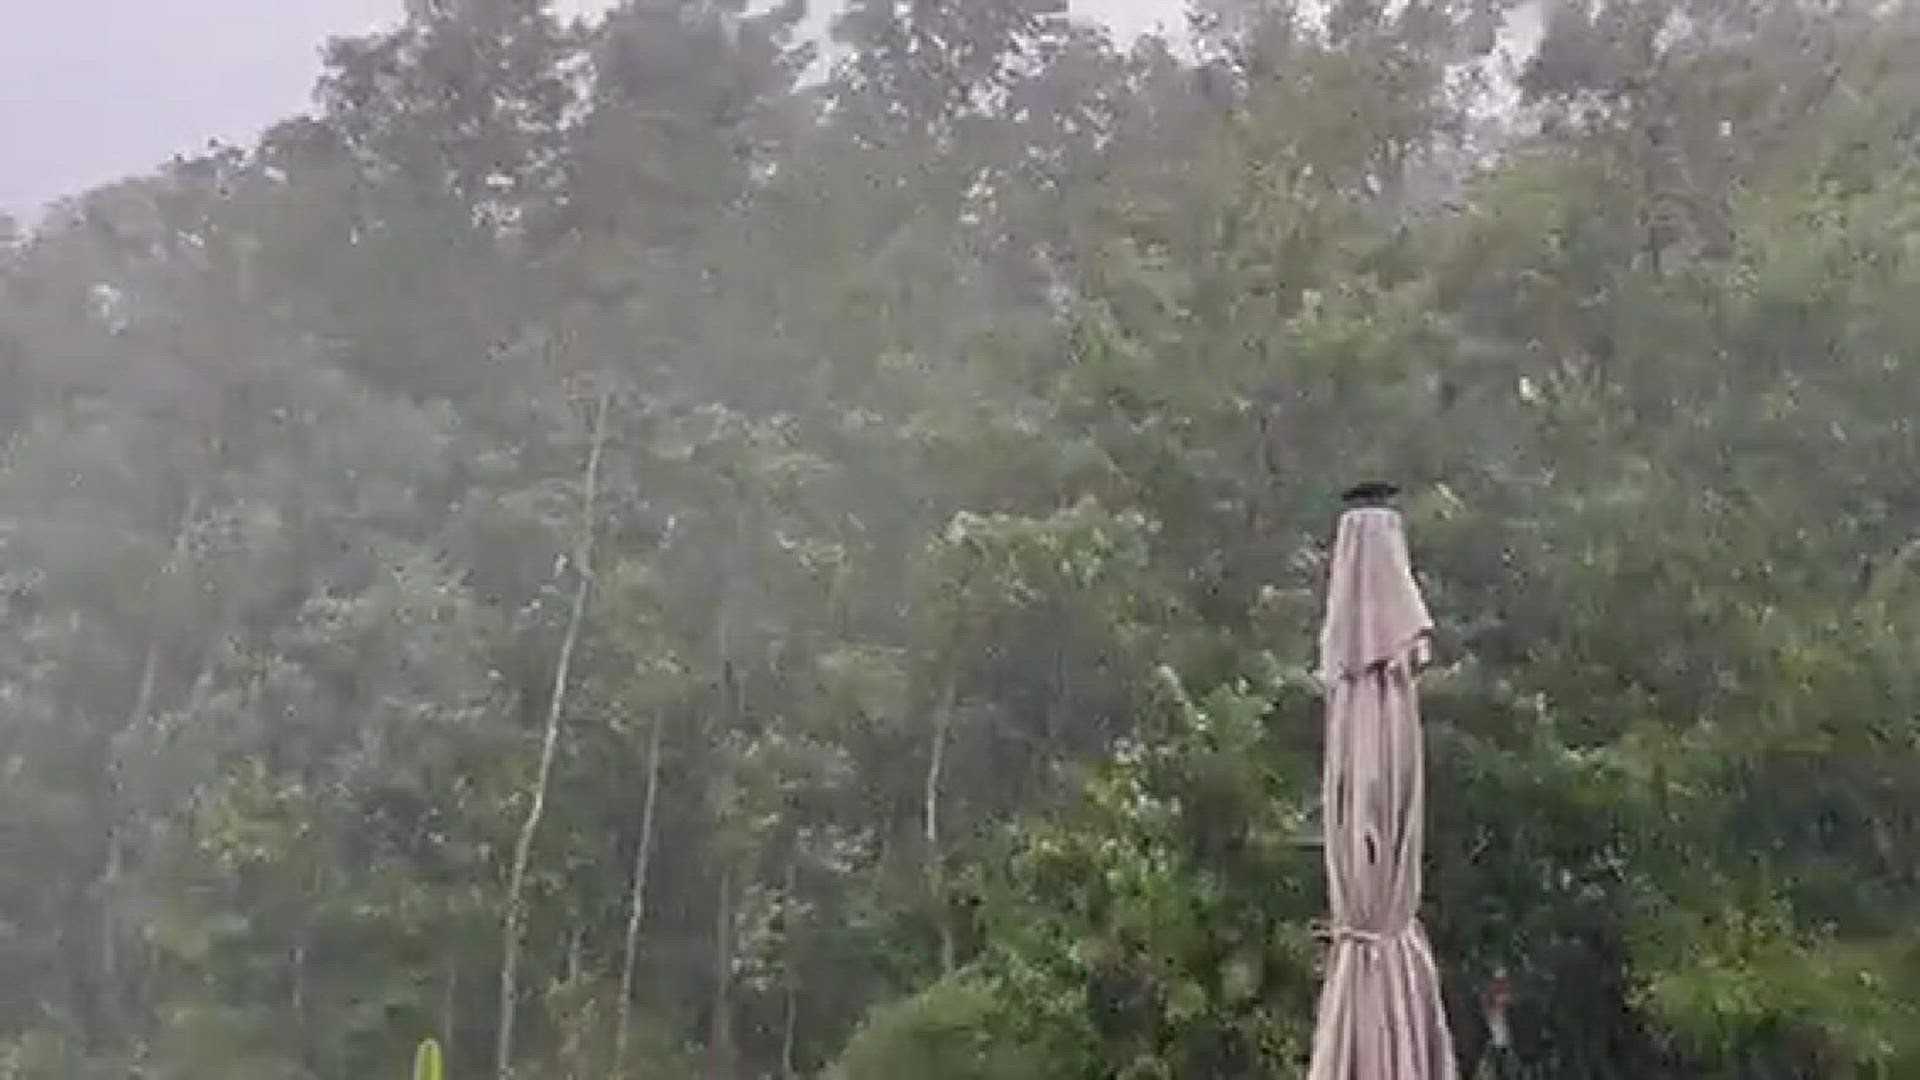 Rainfall caught on camera in the Mandarin area Tuesday afternoon.
Credit: Steve Webb